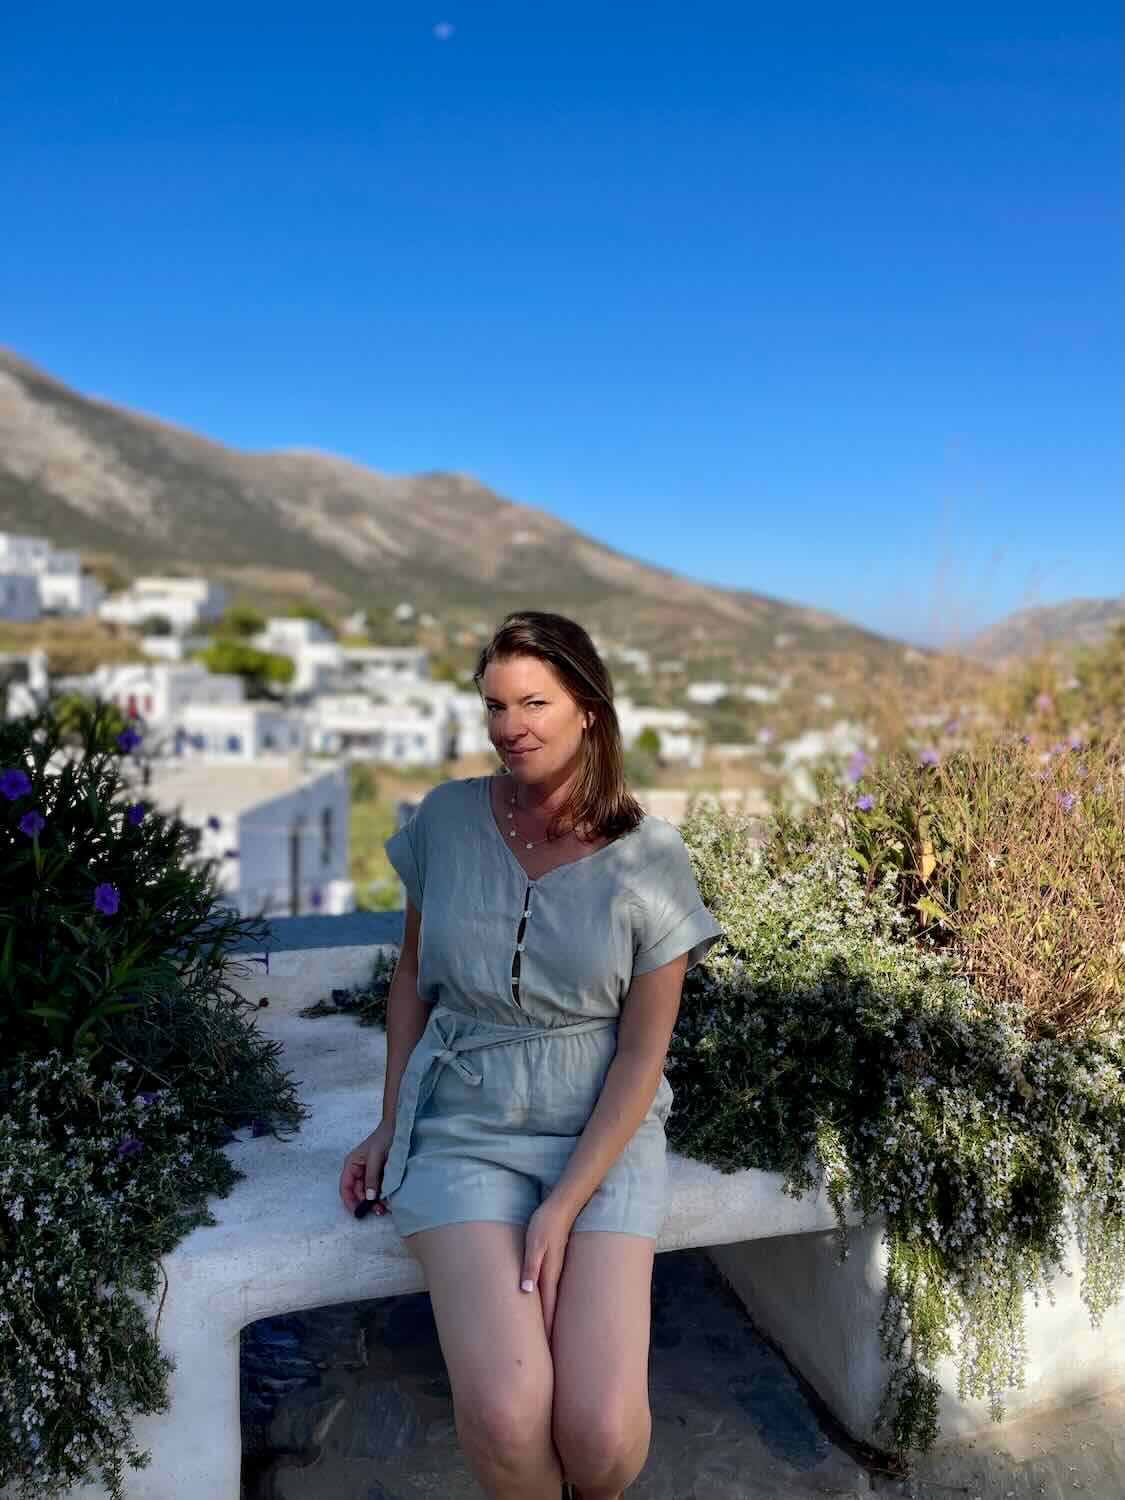 A woman smiles gently while seated on a white bench in Sifnos, with lush greenery and mountains in the background, a serene moment to include in a Sifnos itinerary.